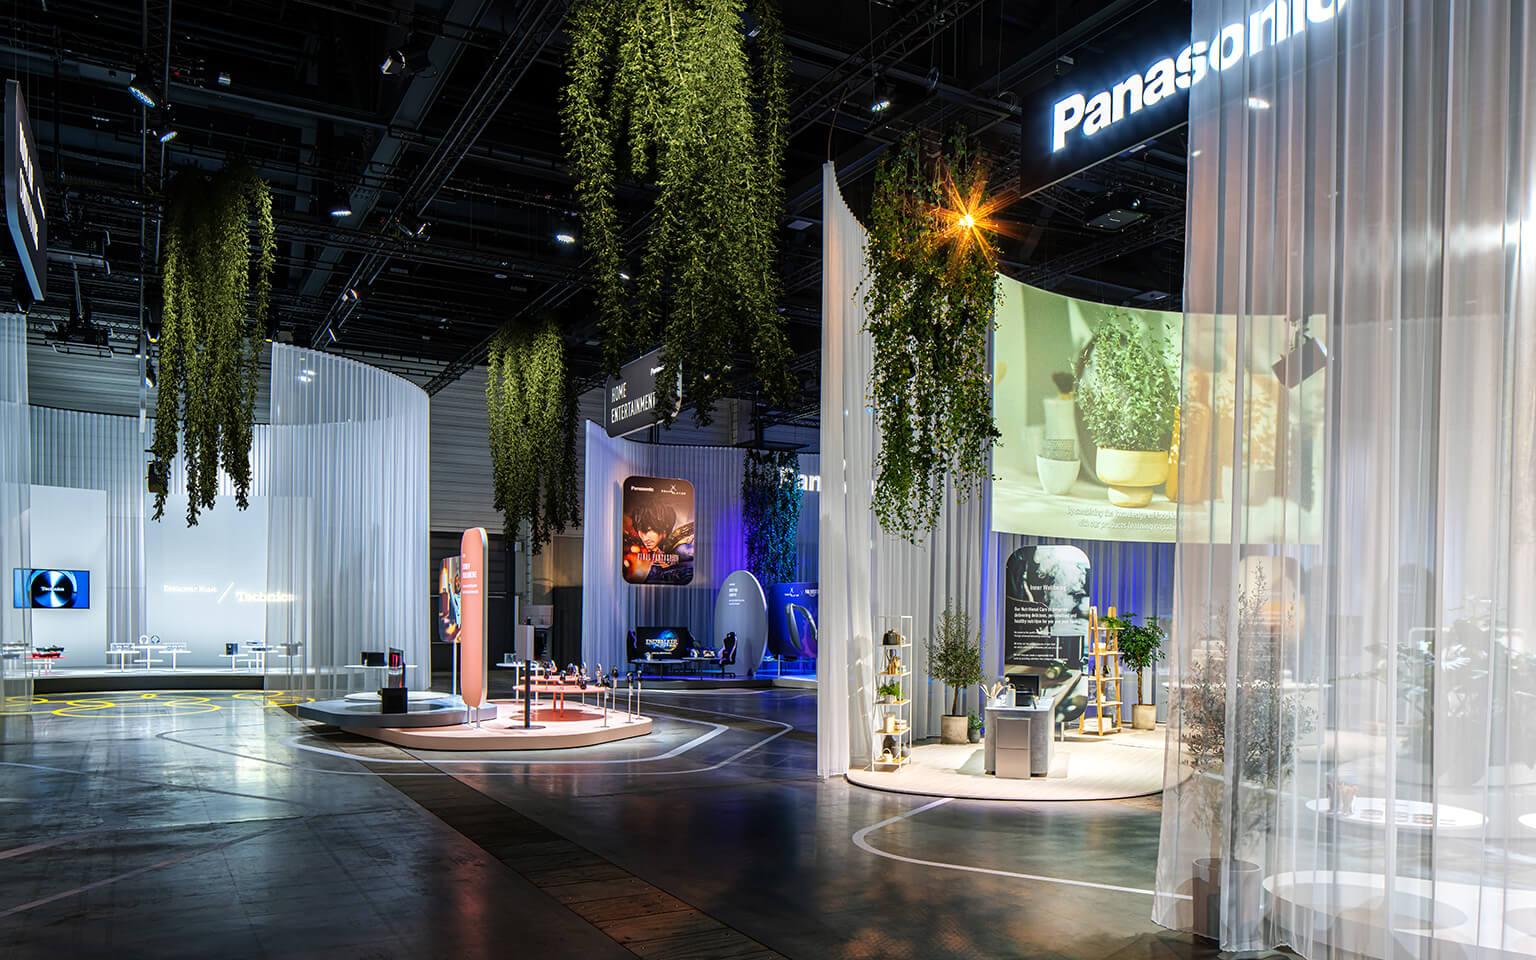 New stand concept for Panasonic with sustainable exhibition stand construction by Display International with reduces CO2 emissions by more than 70%.